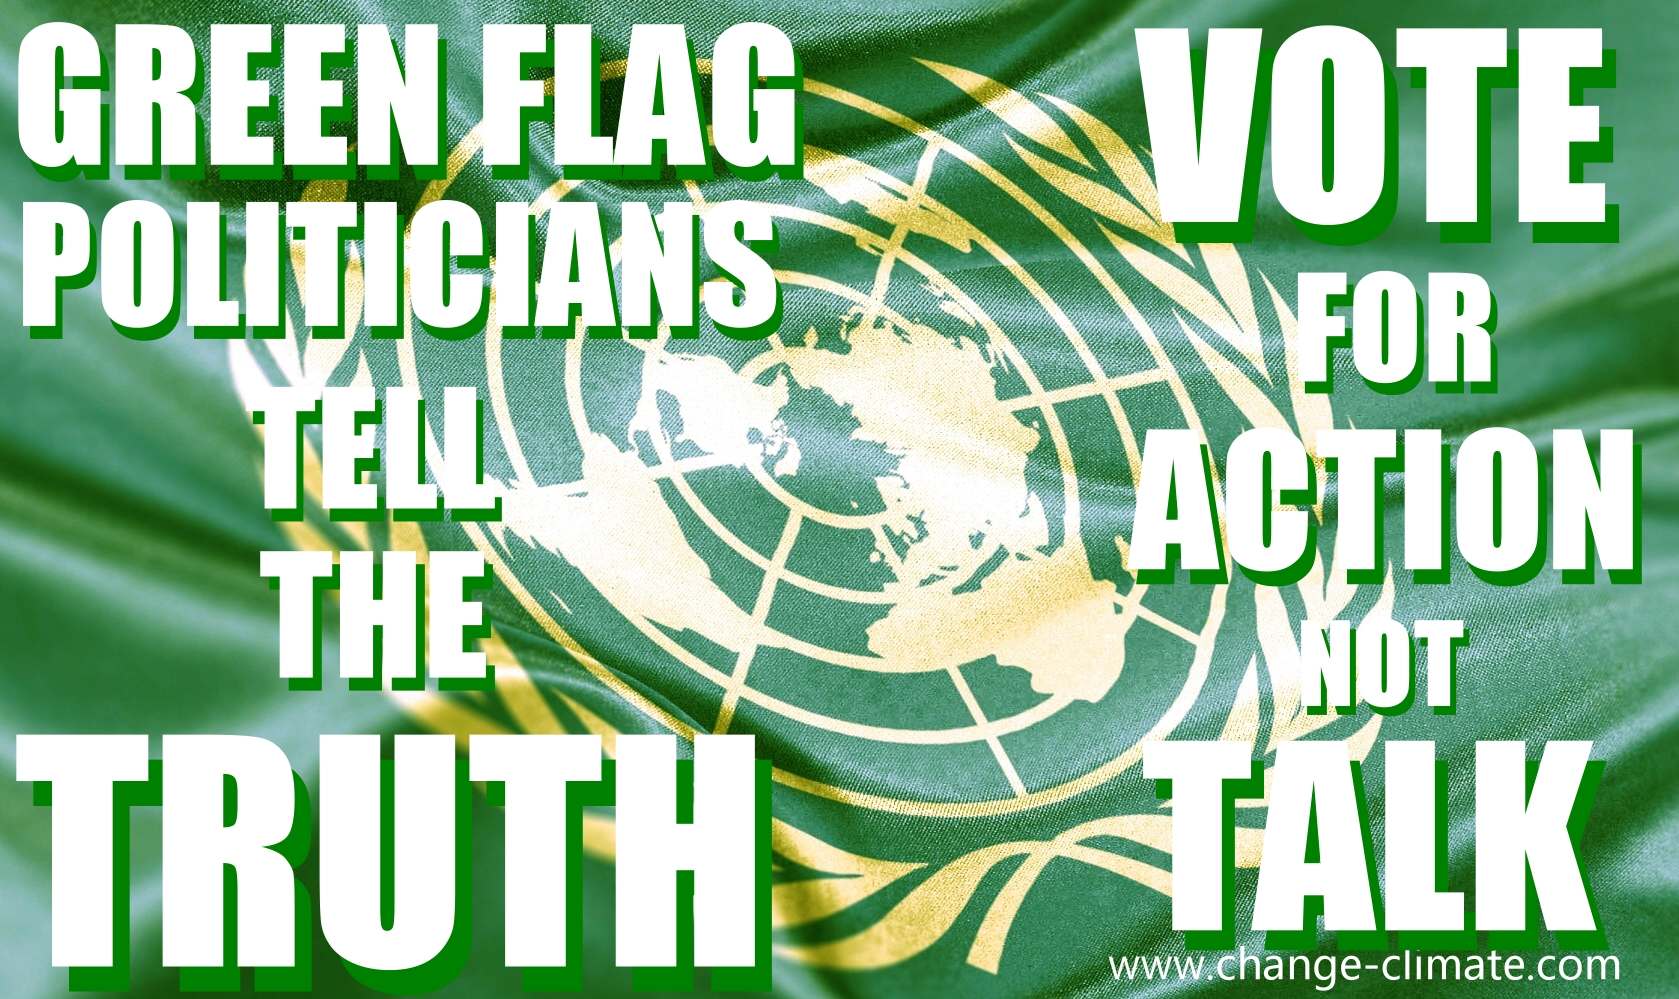 Vote for green flag politicians